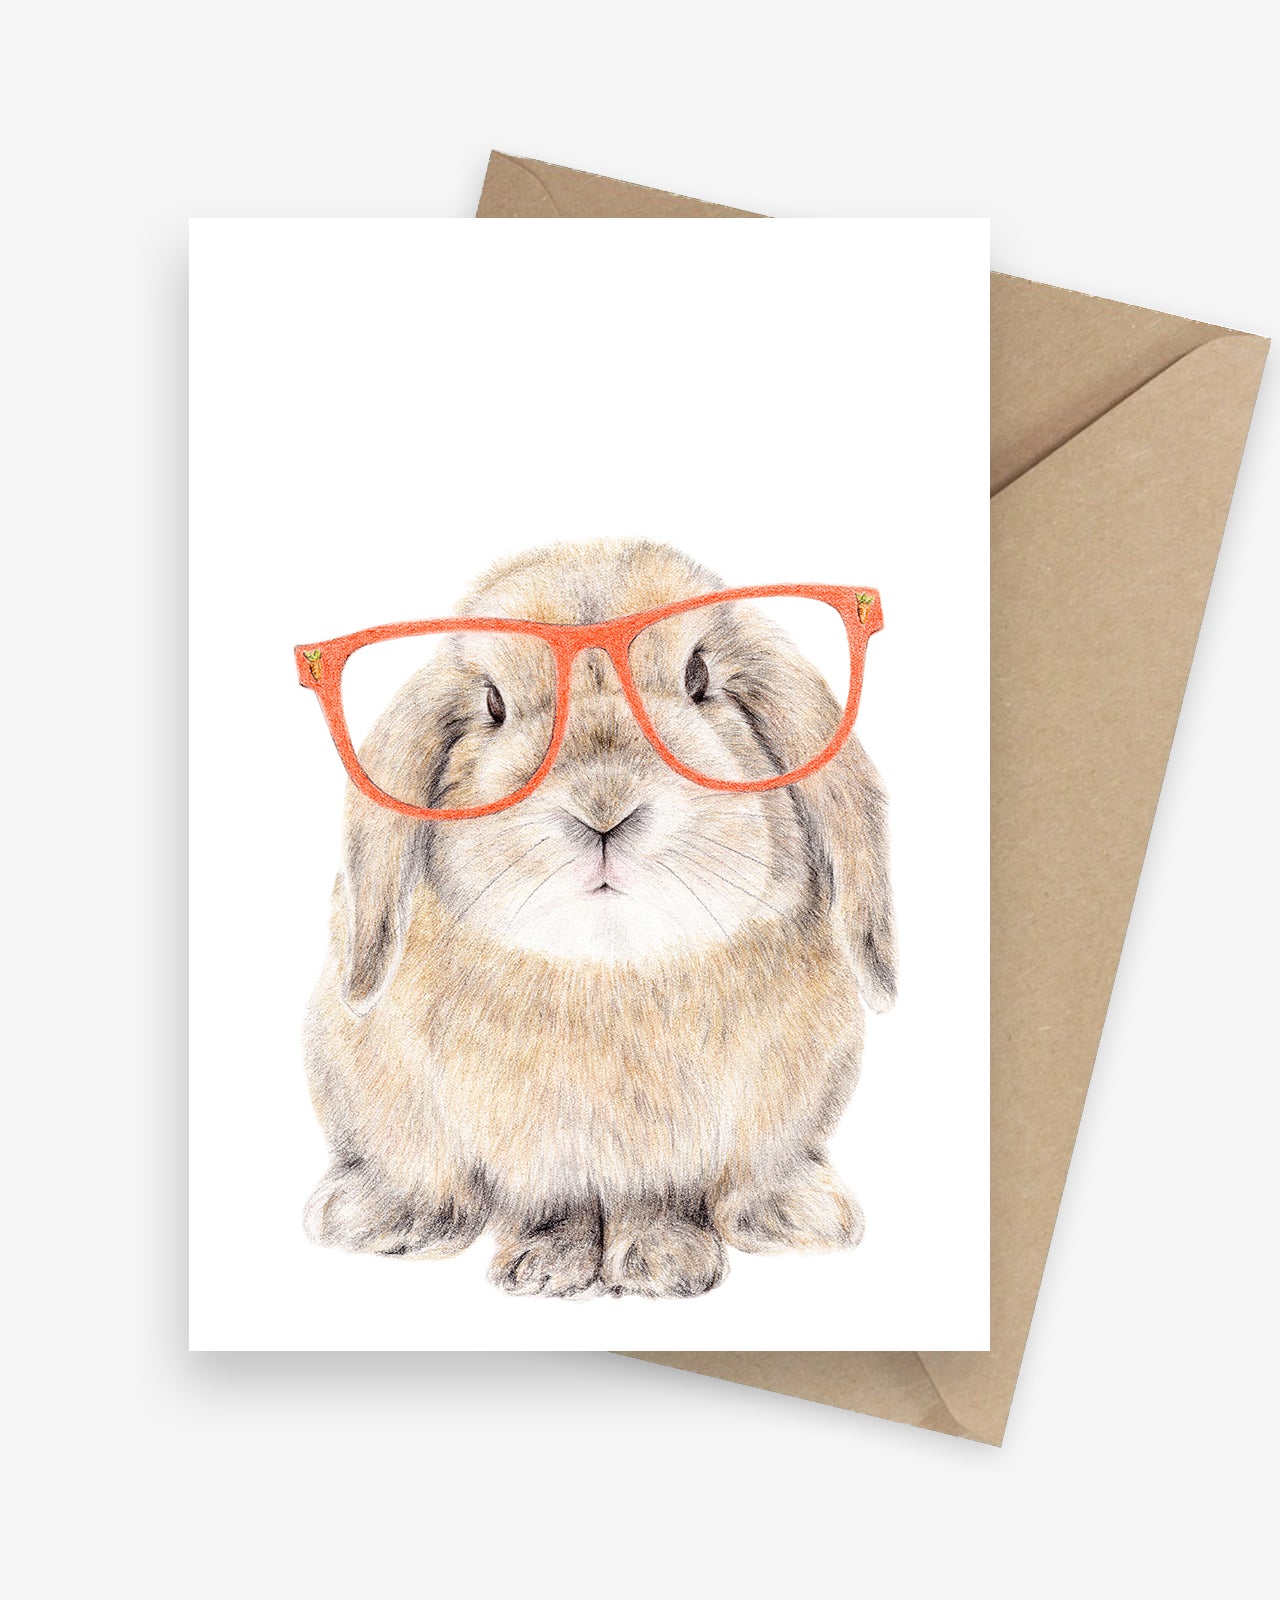 Greeting card featuring a lop-eared bunny with glasses.